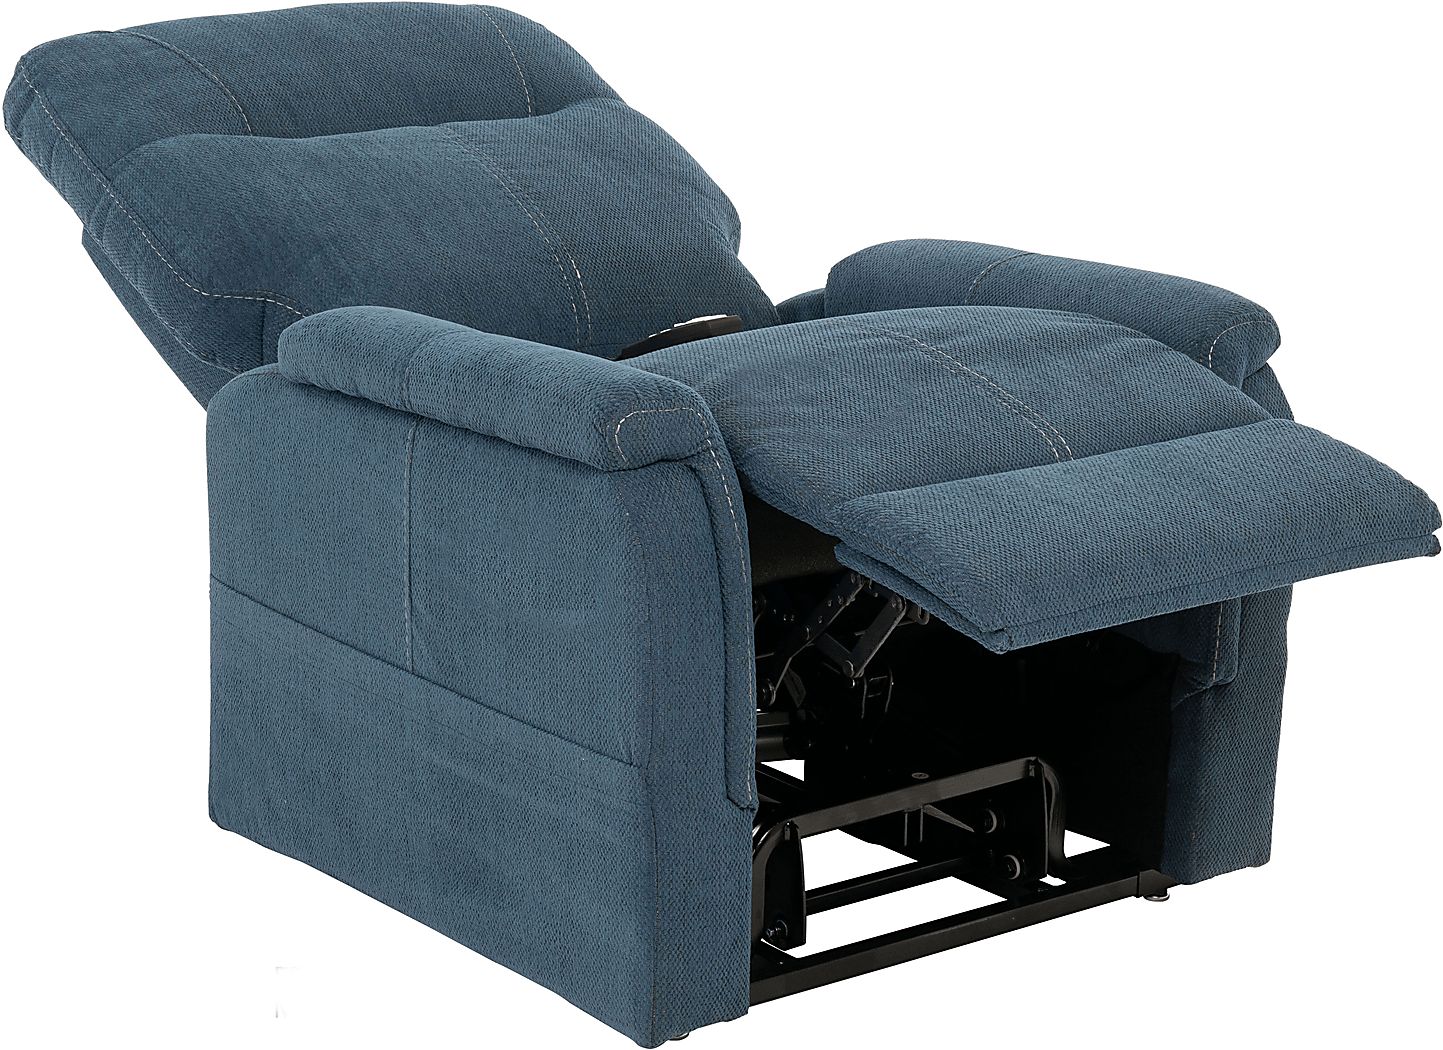 Rooms To Go Baltruso Blue Lift Chair Power Recliner